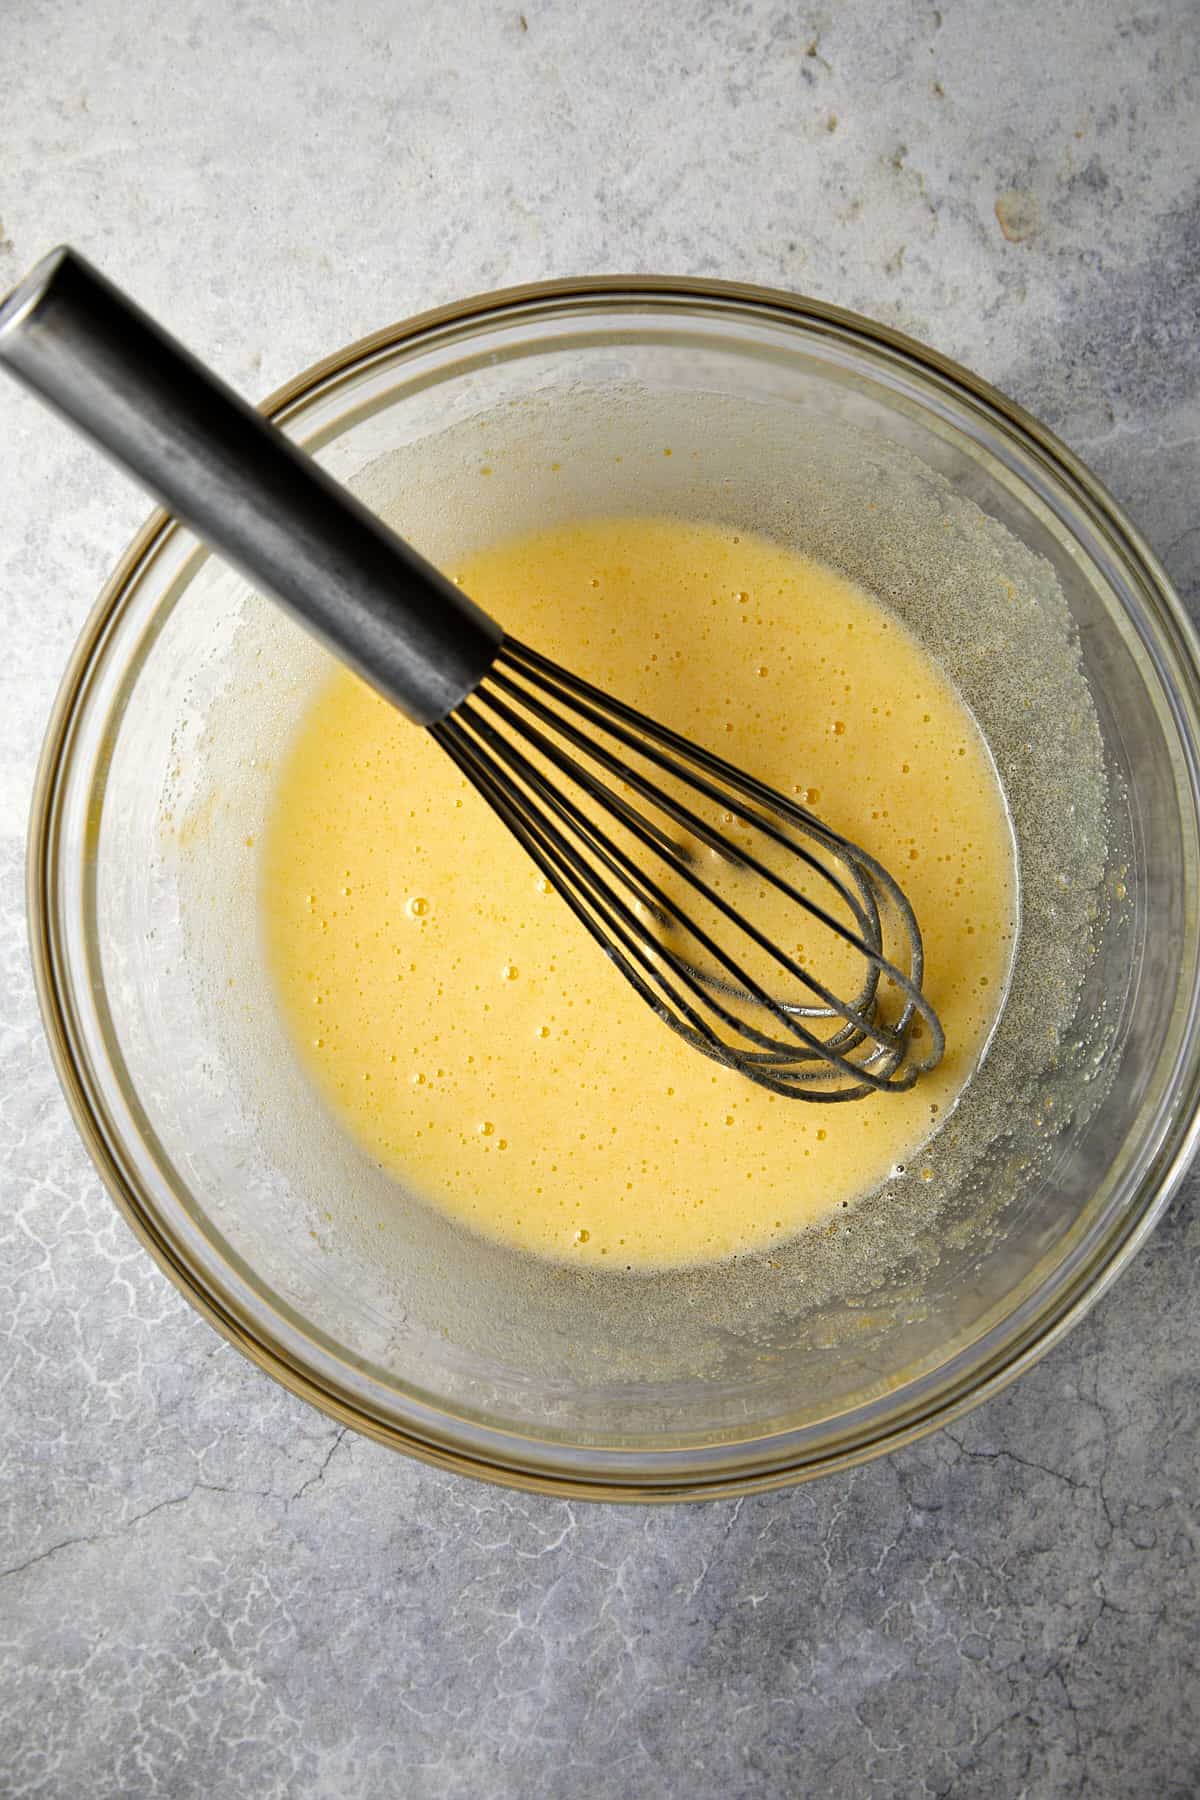 The image depicts a clear glass mixing bowl on a gray surface containing a well-mixed combination of eggs and sugar. A metal whisk is in the bowl. 